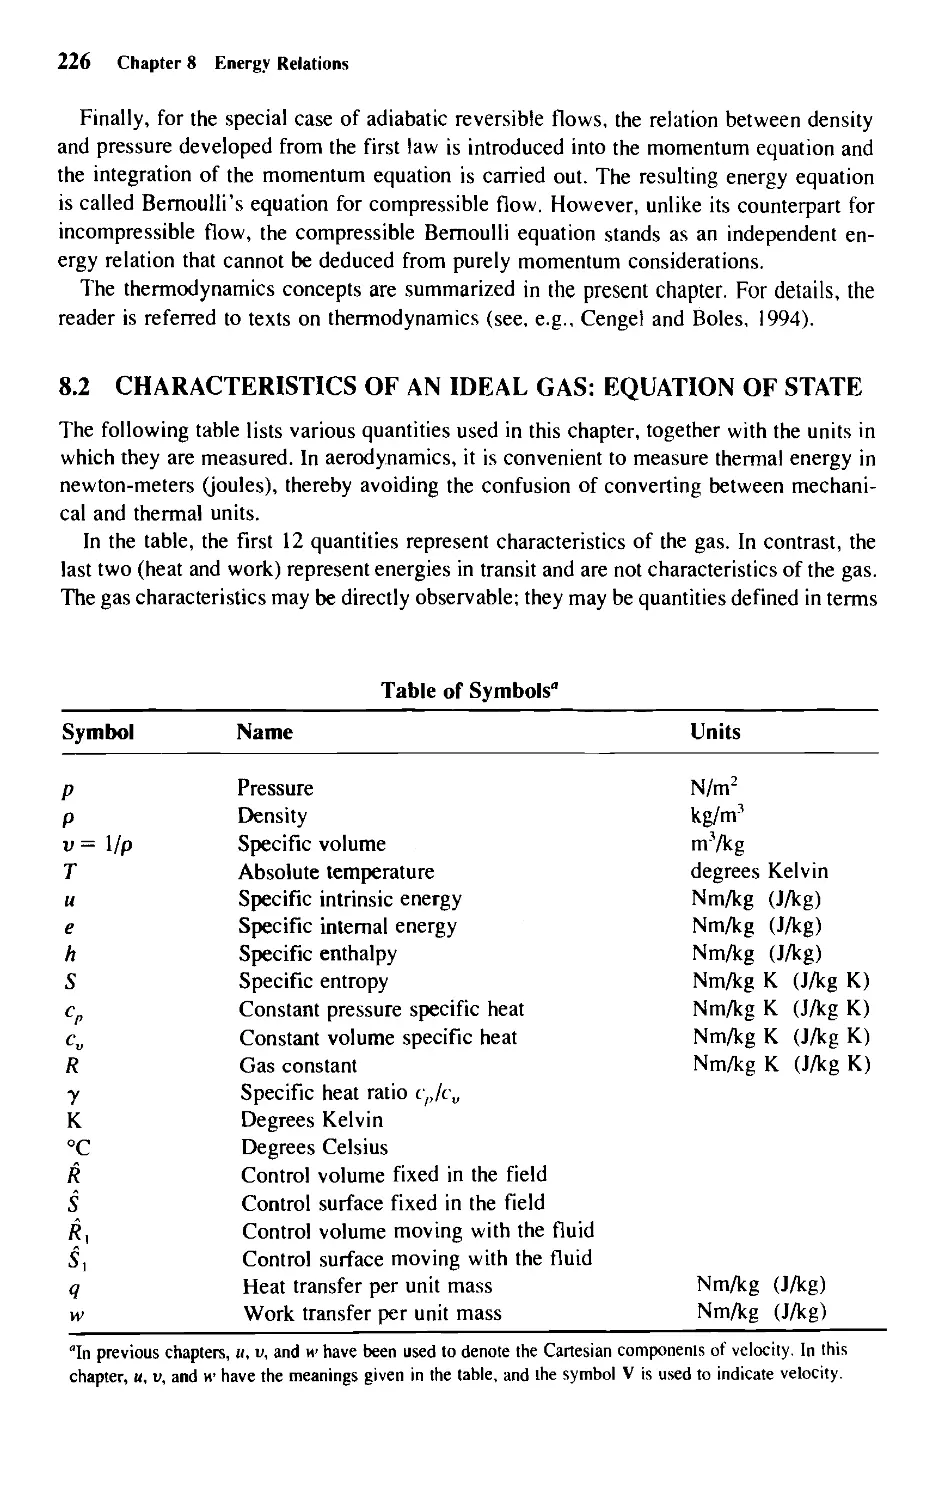 8.2 - Characteristics of an Ideal Gas: Equation of State